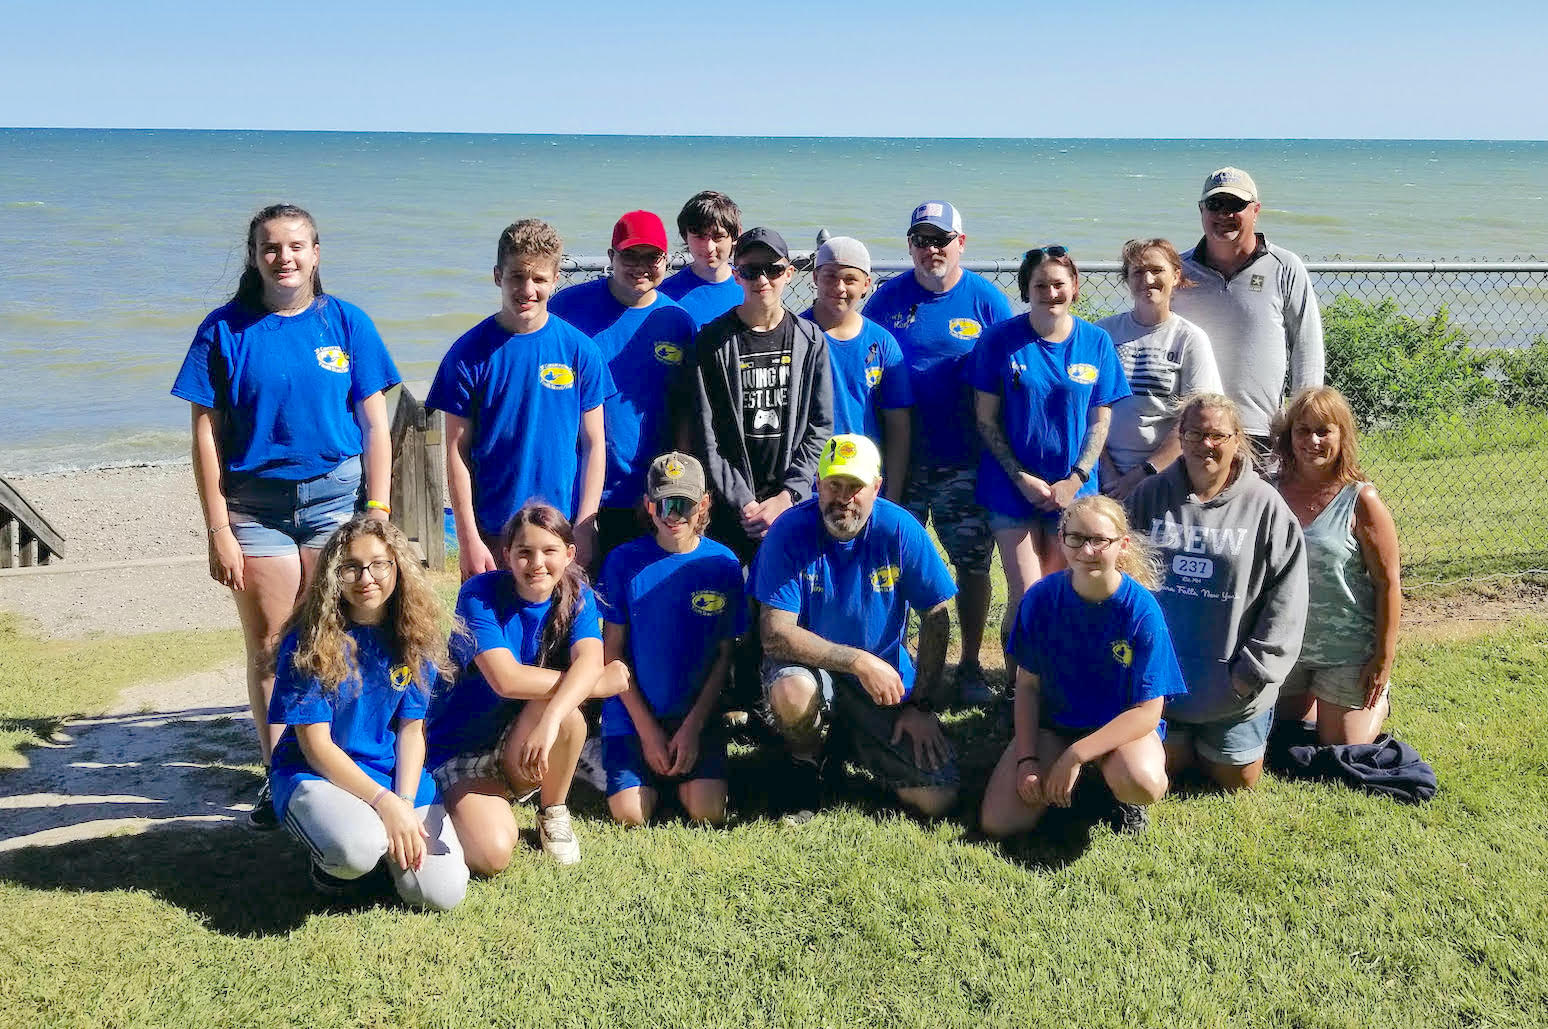 Pictured are the 3F youth club members who helped clean up the beach at Porter on the Lake town park. Joining them were 3F coordinators Colleen and Tim Gunther, Ron Holle and Porter Town Supervisor Duffy Johnston. (Photo by Terry Duffy)